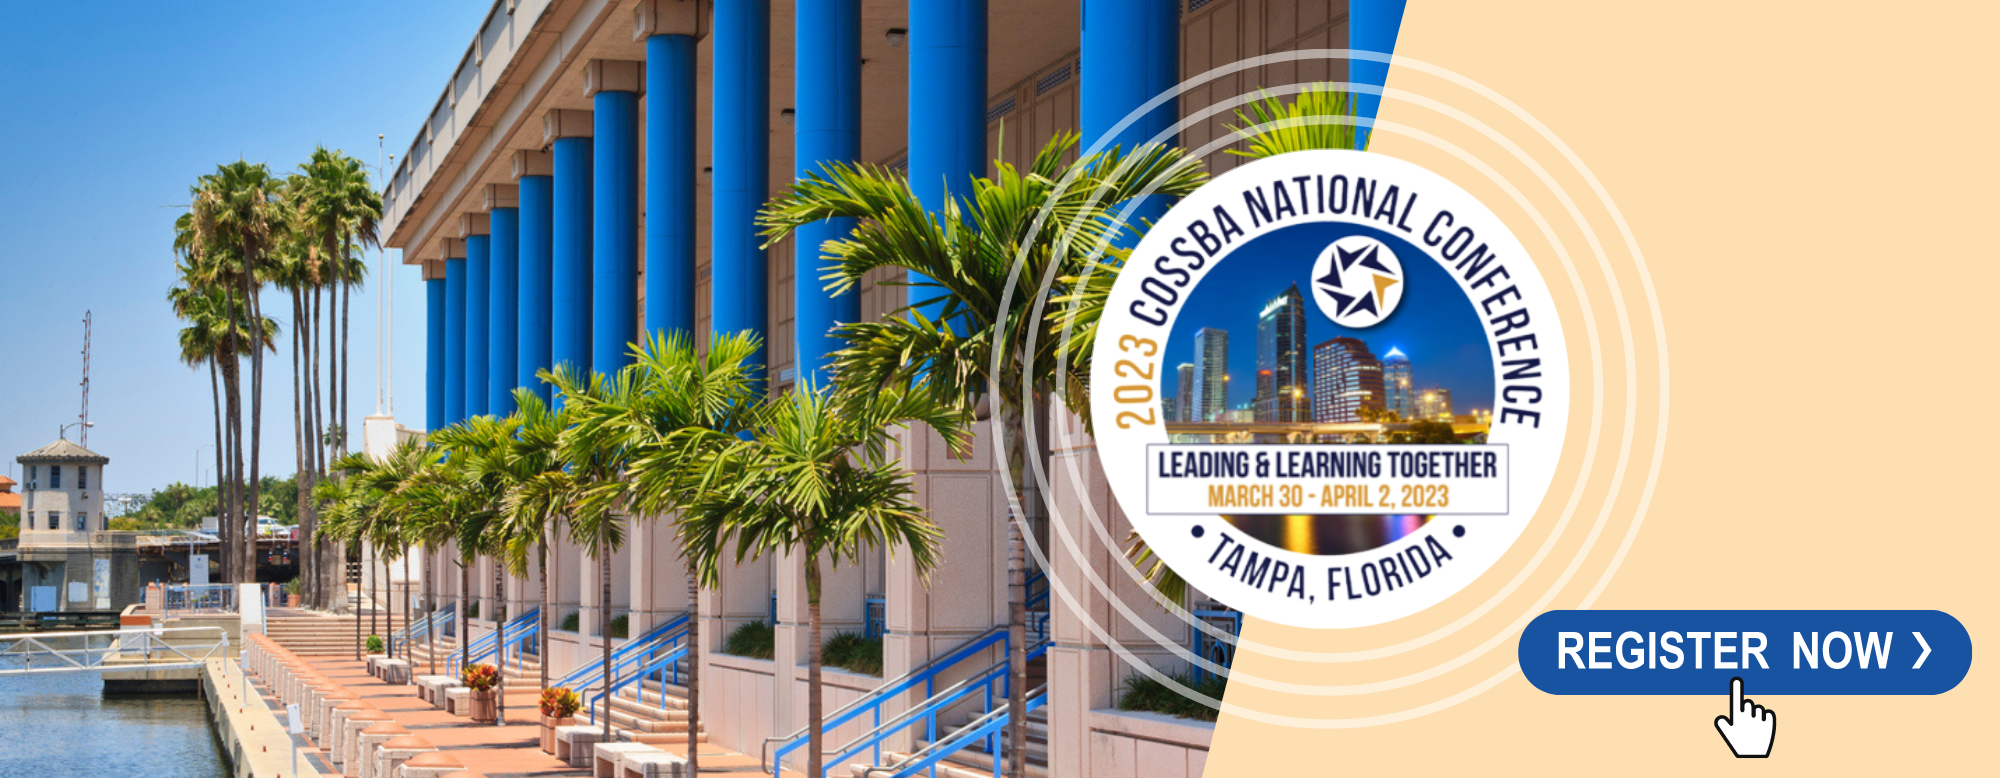 Register for COSSBA’s national conference